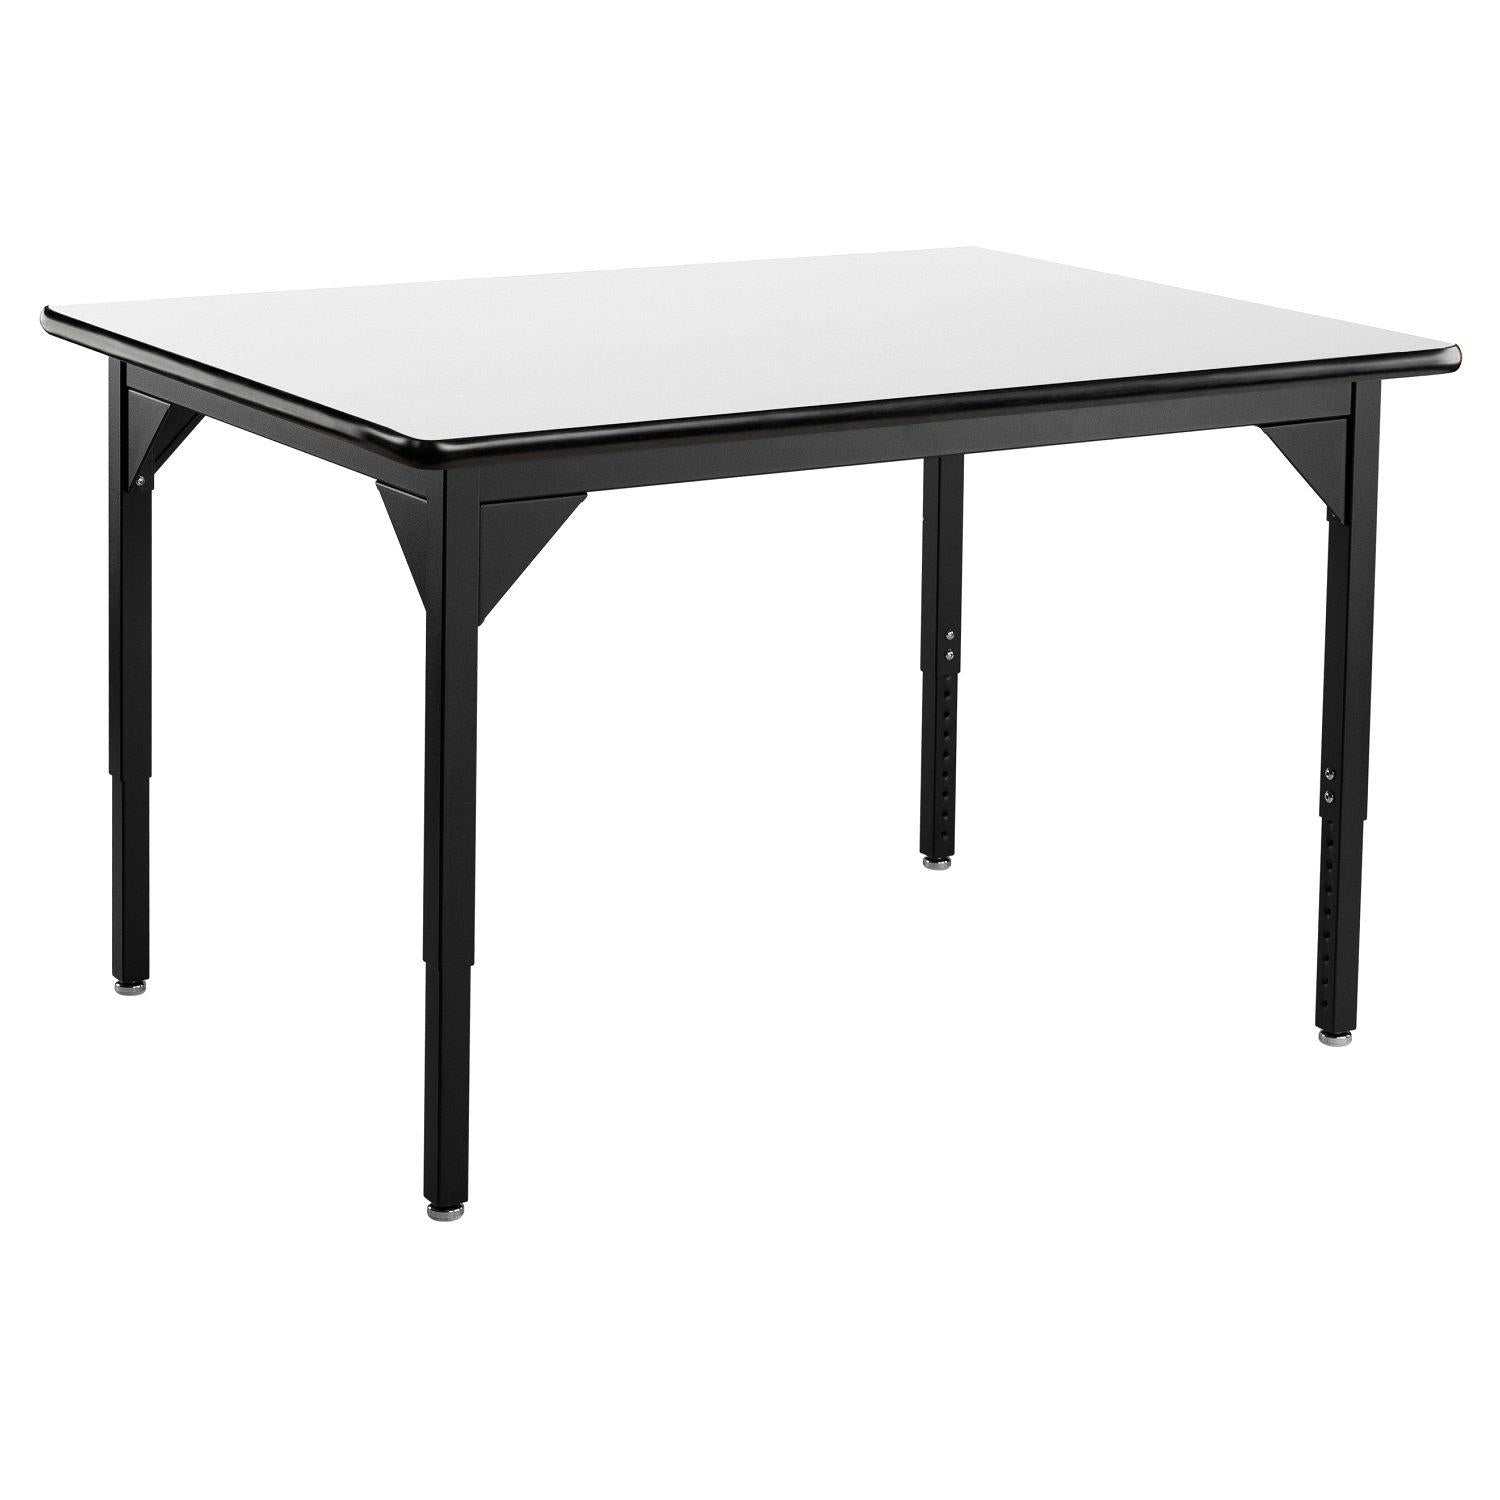 Heavy-Duty Height-Adjustable Utility Table, Black Frame, 36" x 48", Whiteboard High-Pressure Laminate Top